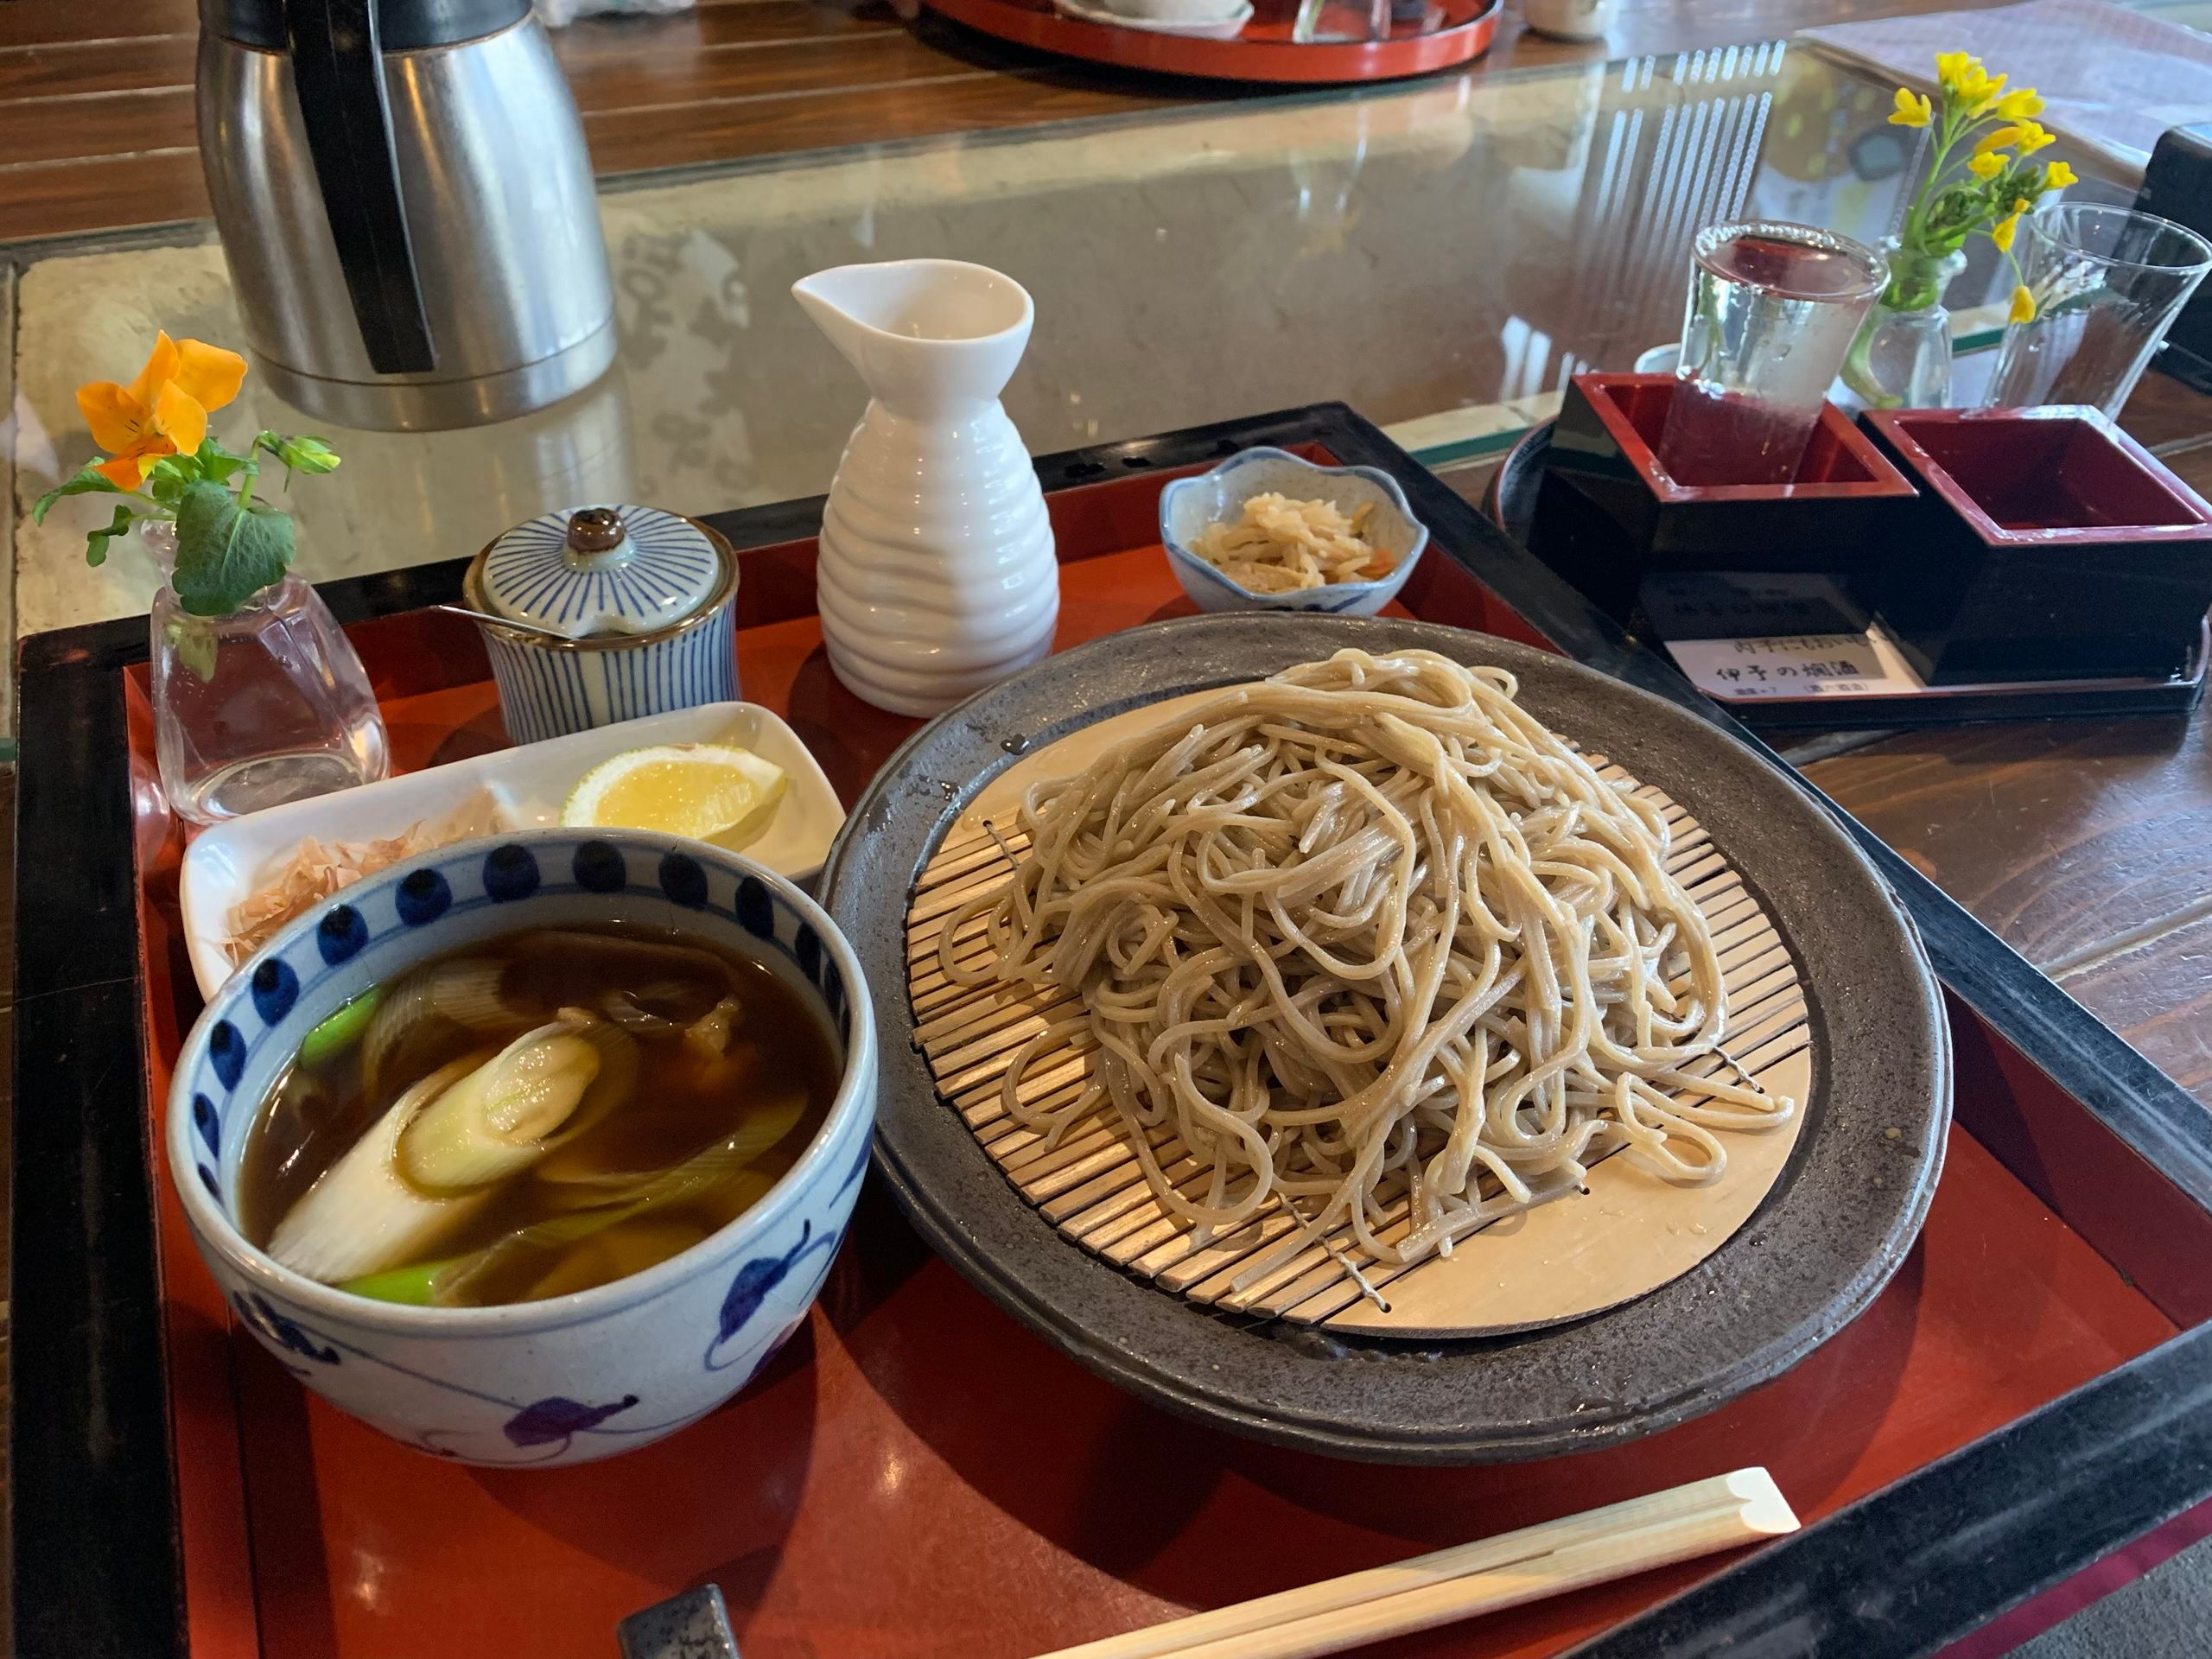 A Japanese meal of buckwheat noodles and vegetable soup on a tray.